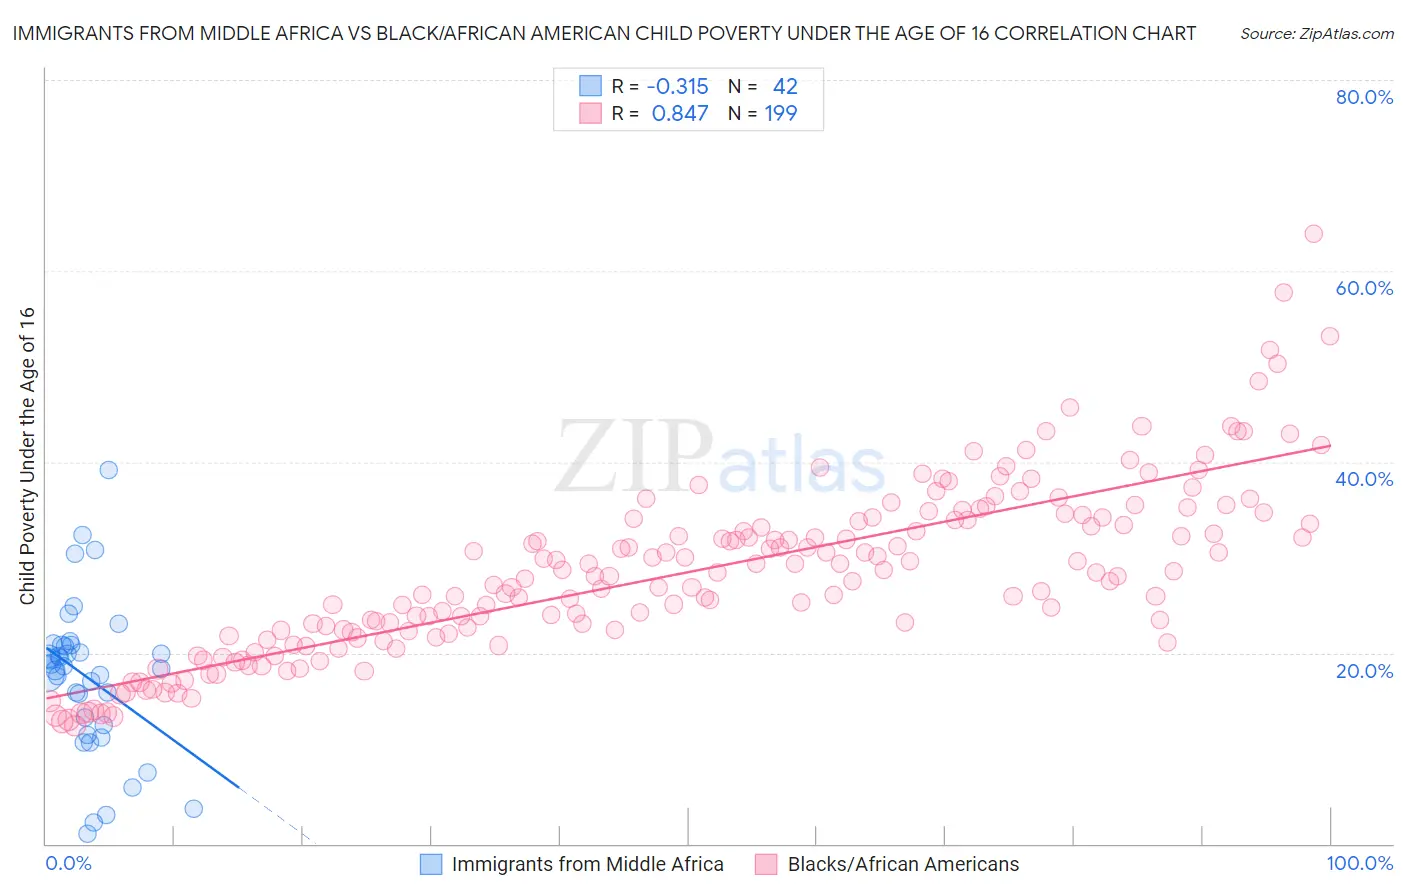 Immigrants from Middle Africa vs Black/African American Child Poverty Under the Age of 16